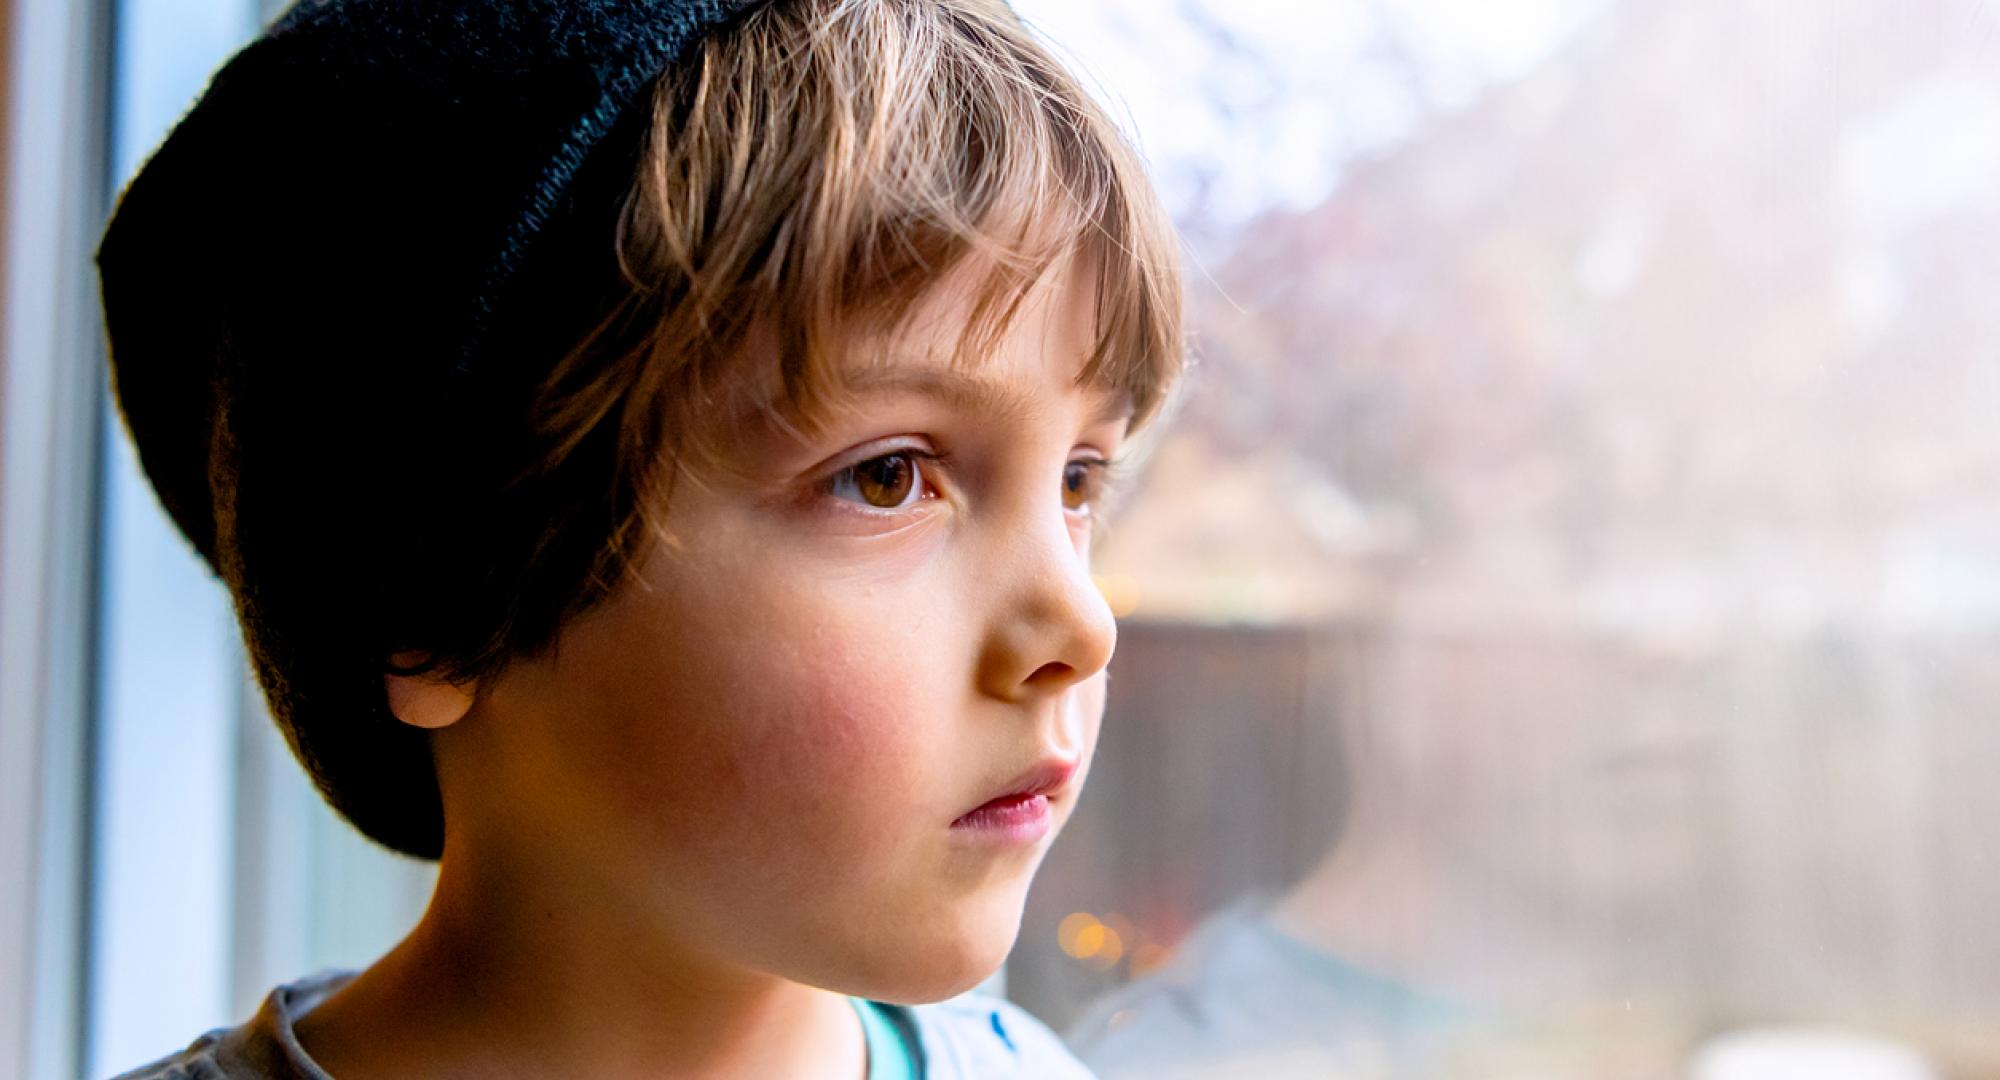 Pensive looking child looks out of a window